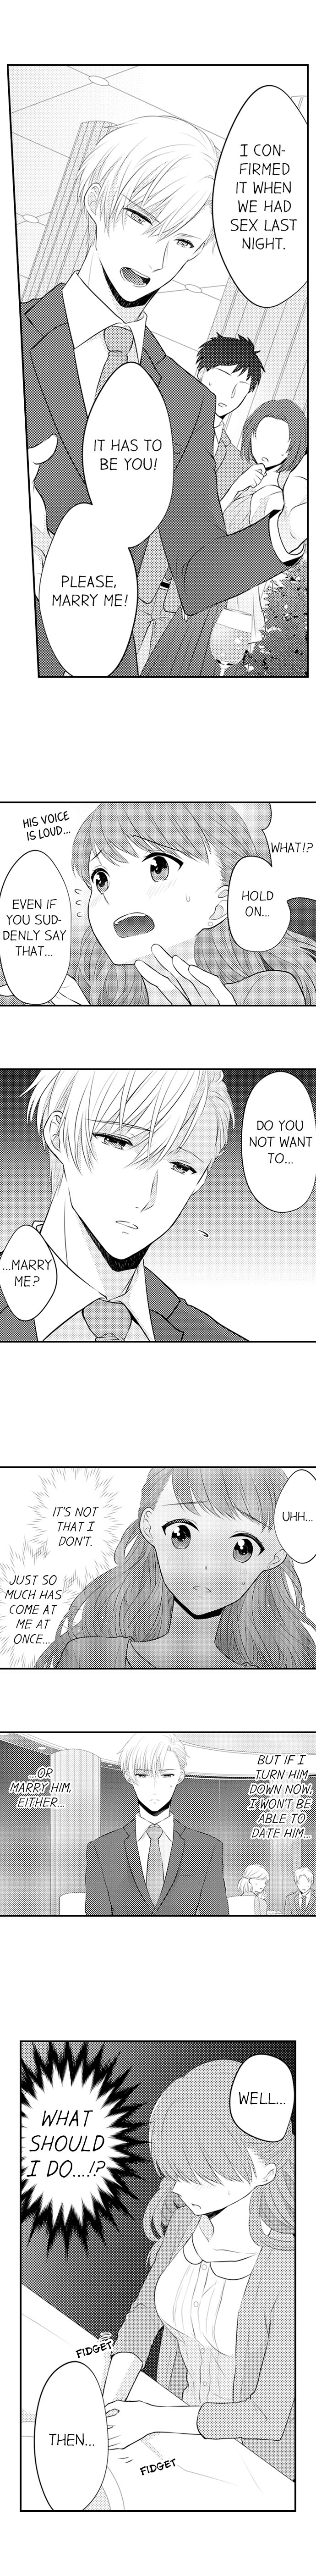 You're My Best Sex so Marry Me Ch.4